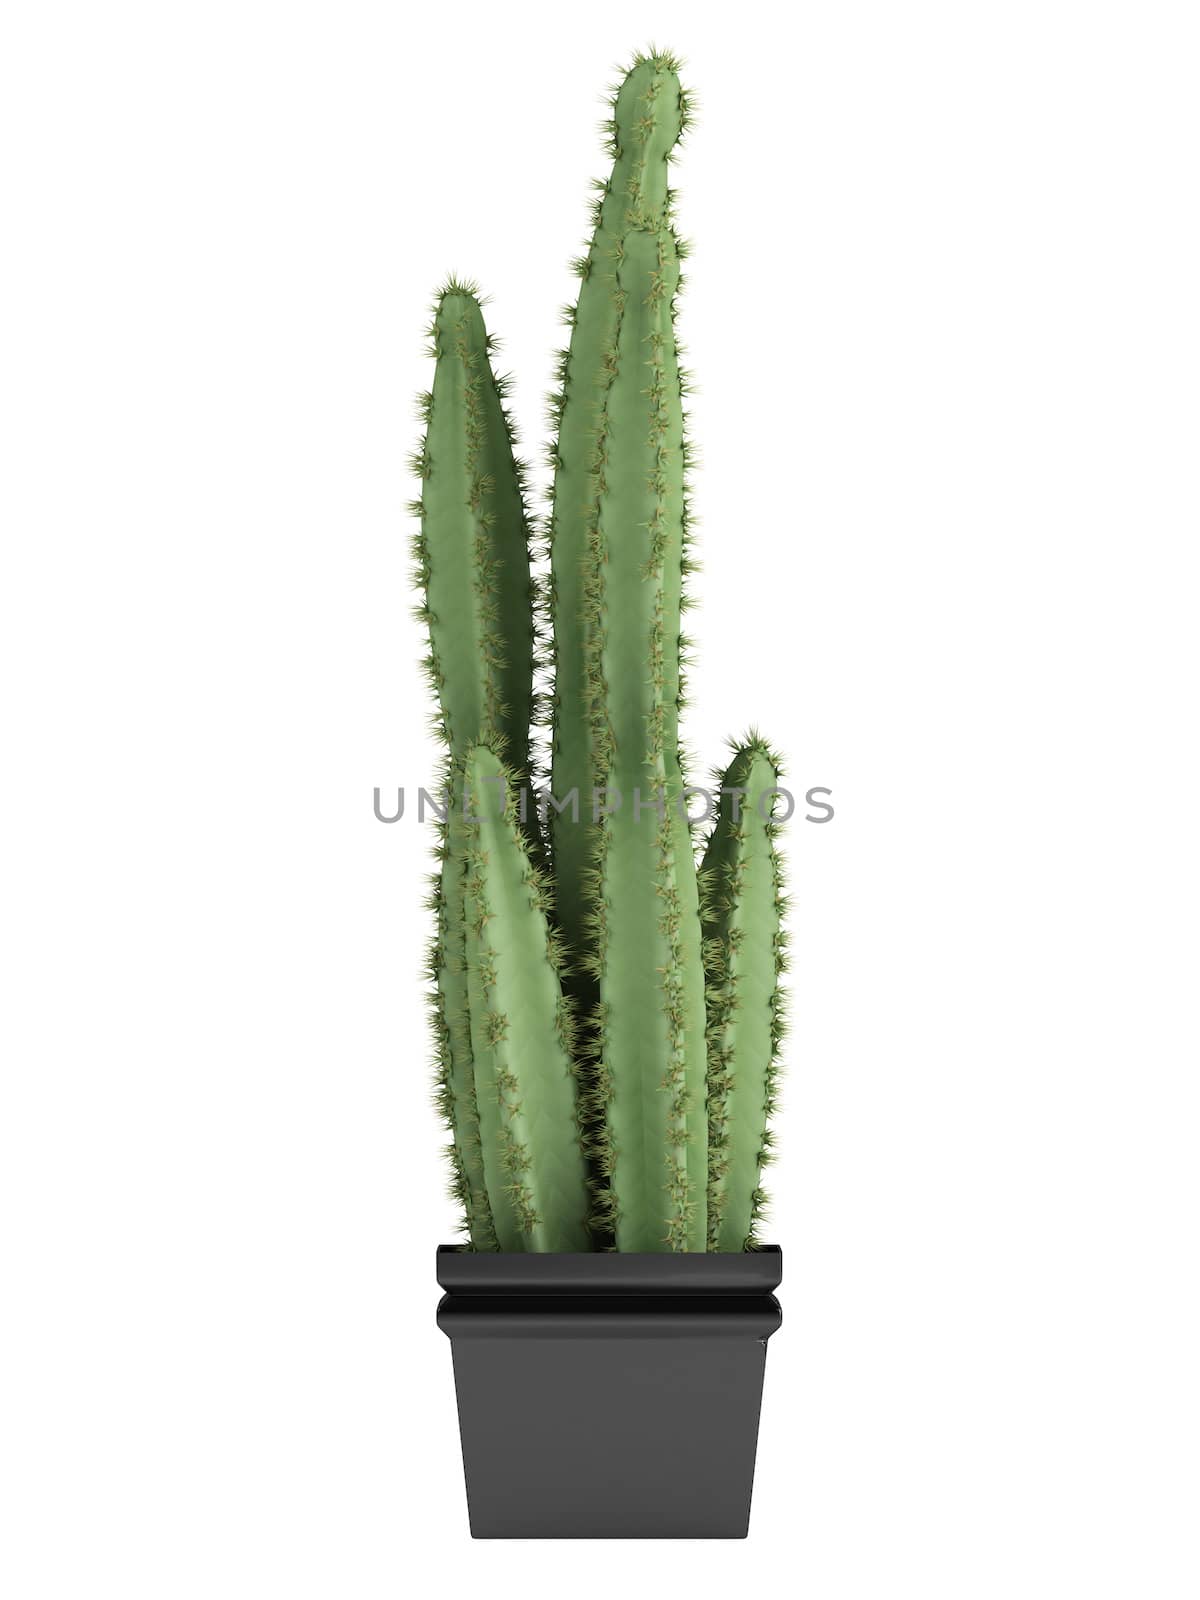 Pilosocereus cactus or columnar hairy cactus, which has hairy areoles with golden spines growing in a container as a houseplant isolated on white